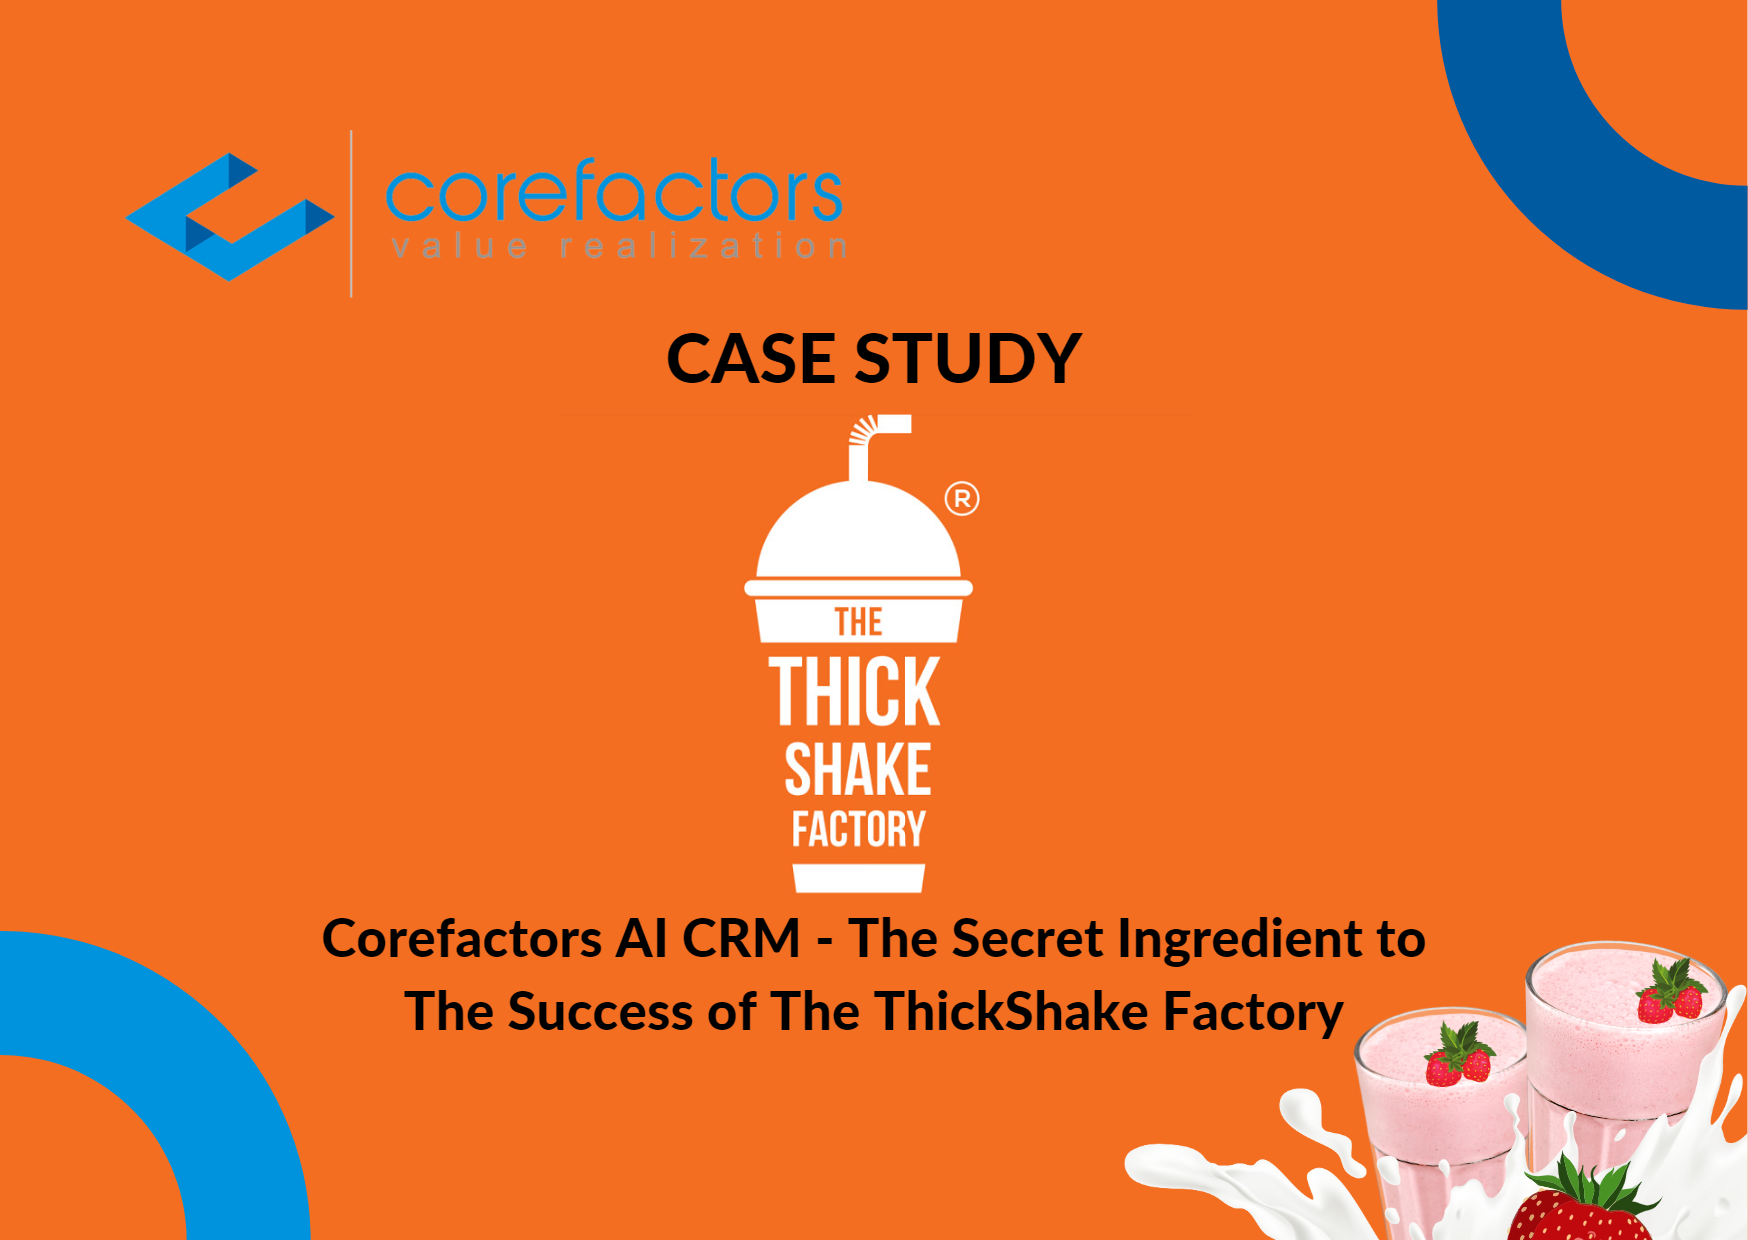 Corefactors AI CRM - The Secret Ingredient to The Success of The ThickShake Factory